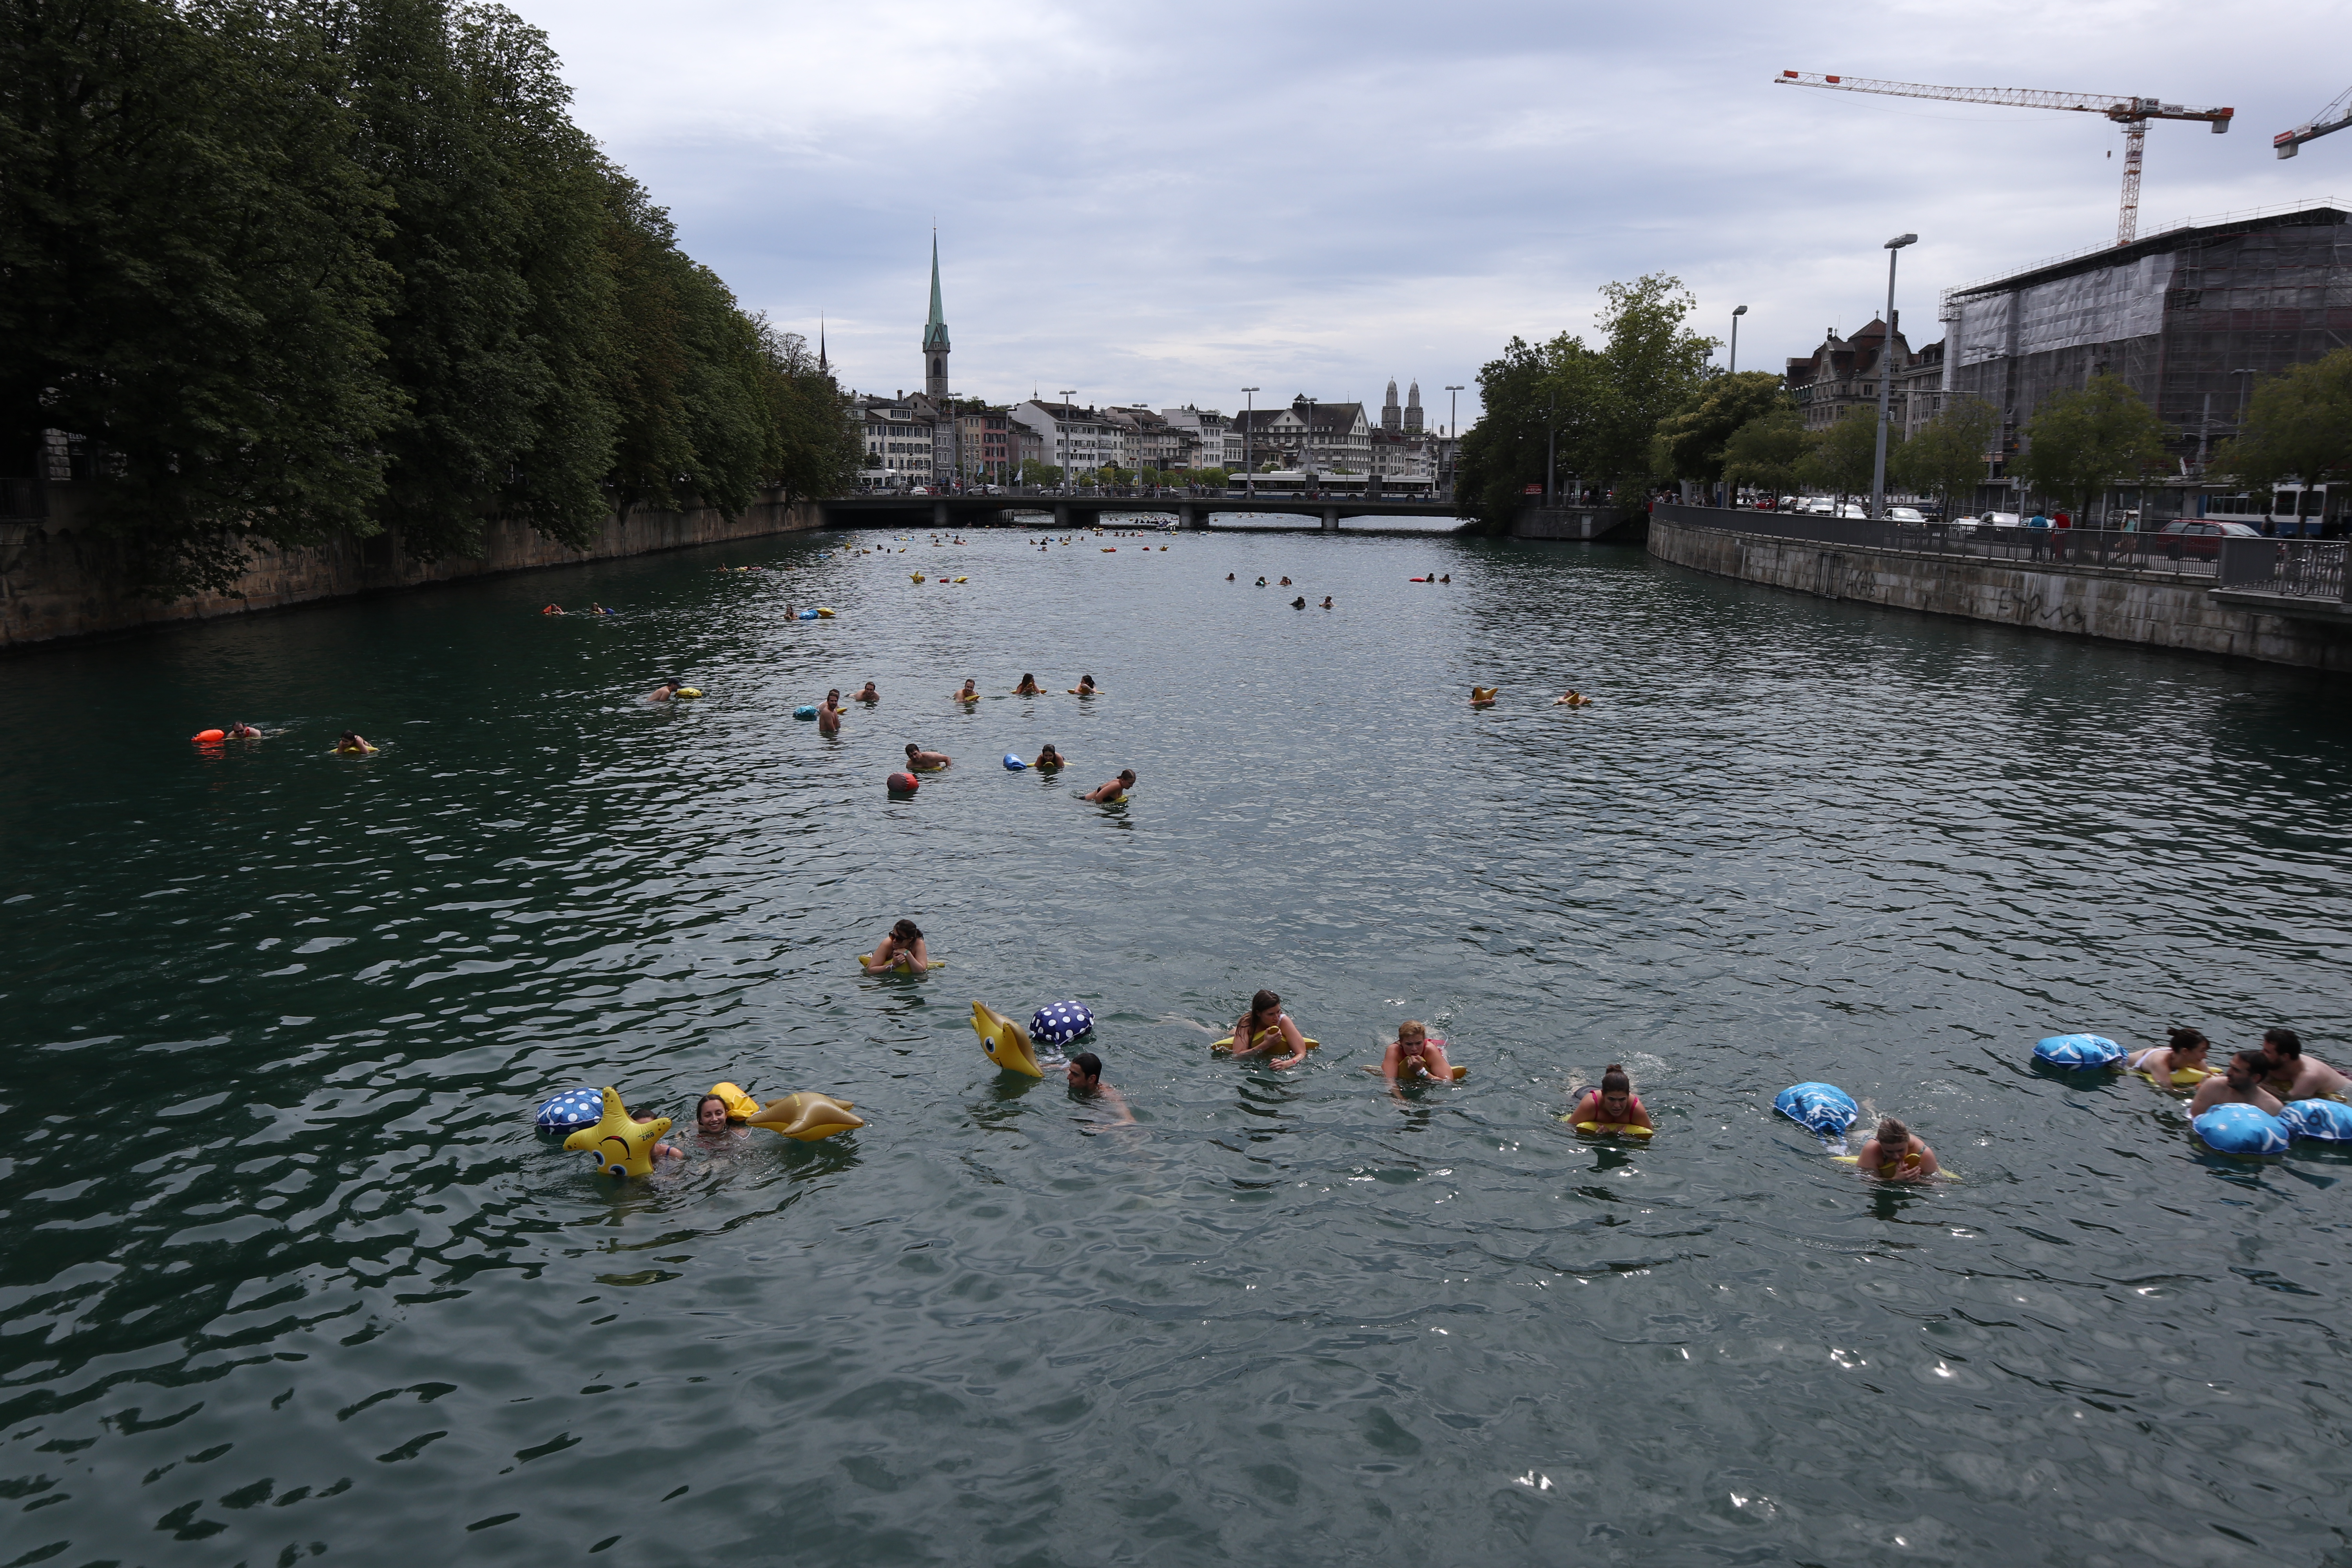 People swimming along the river Limmat